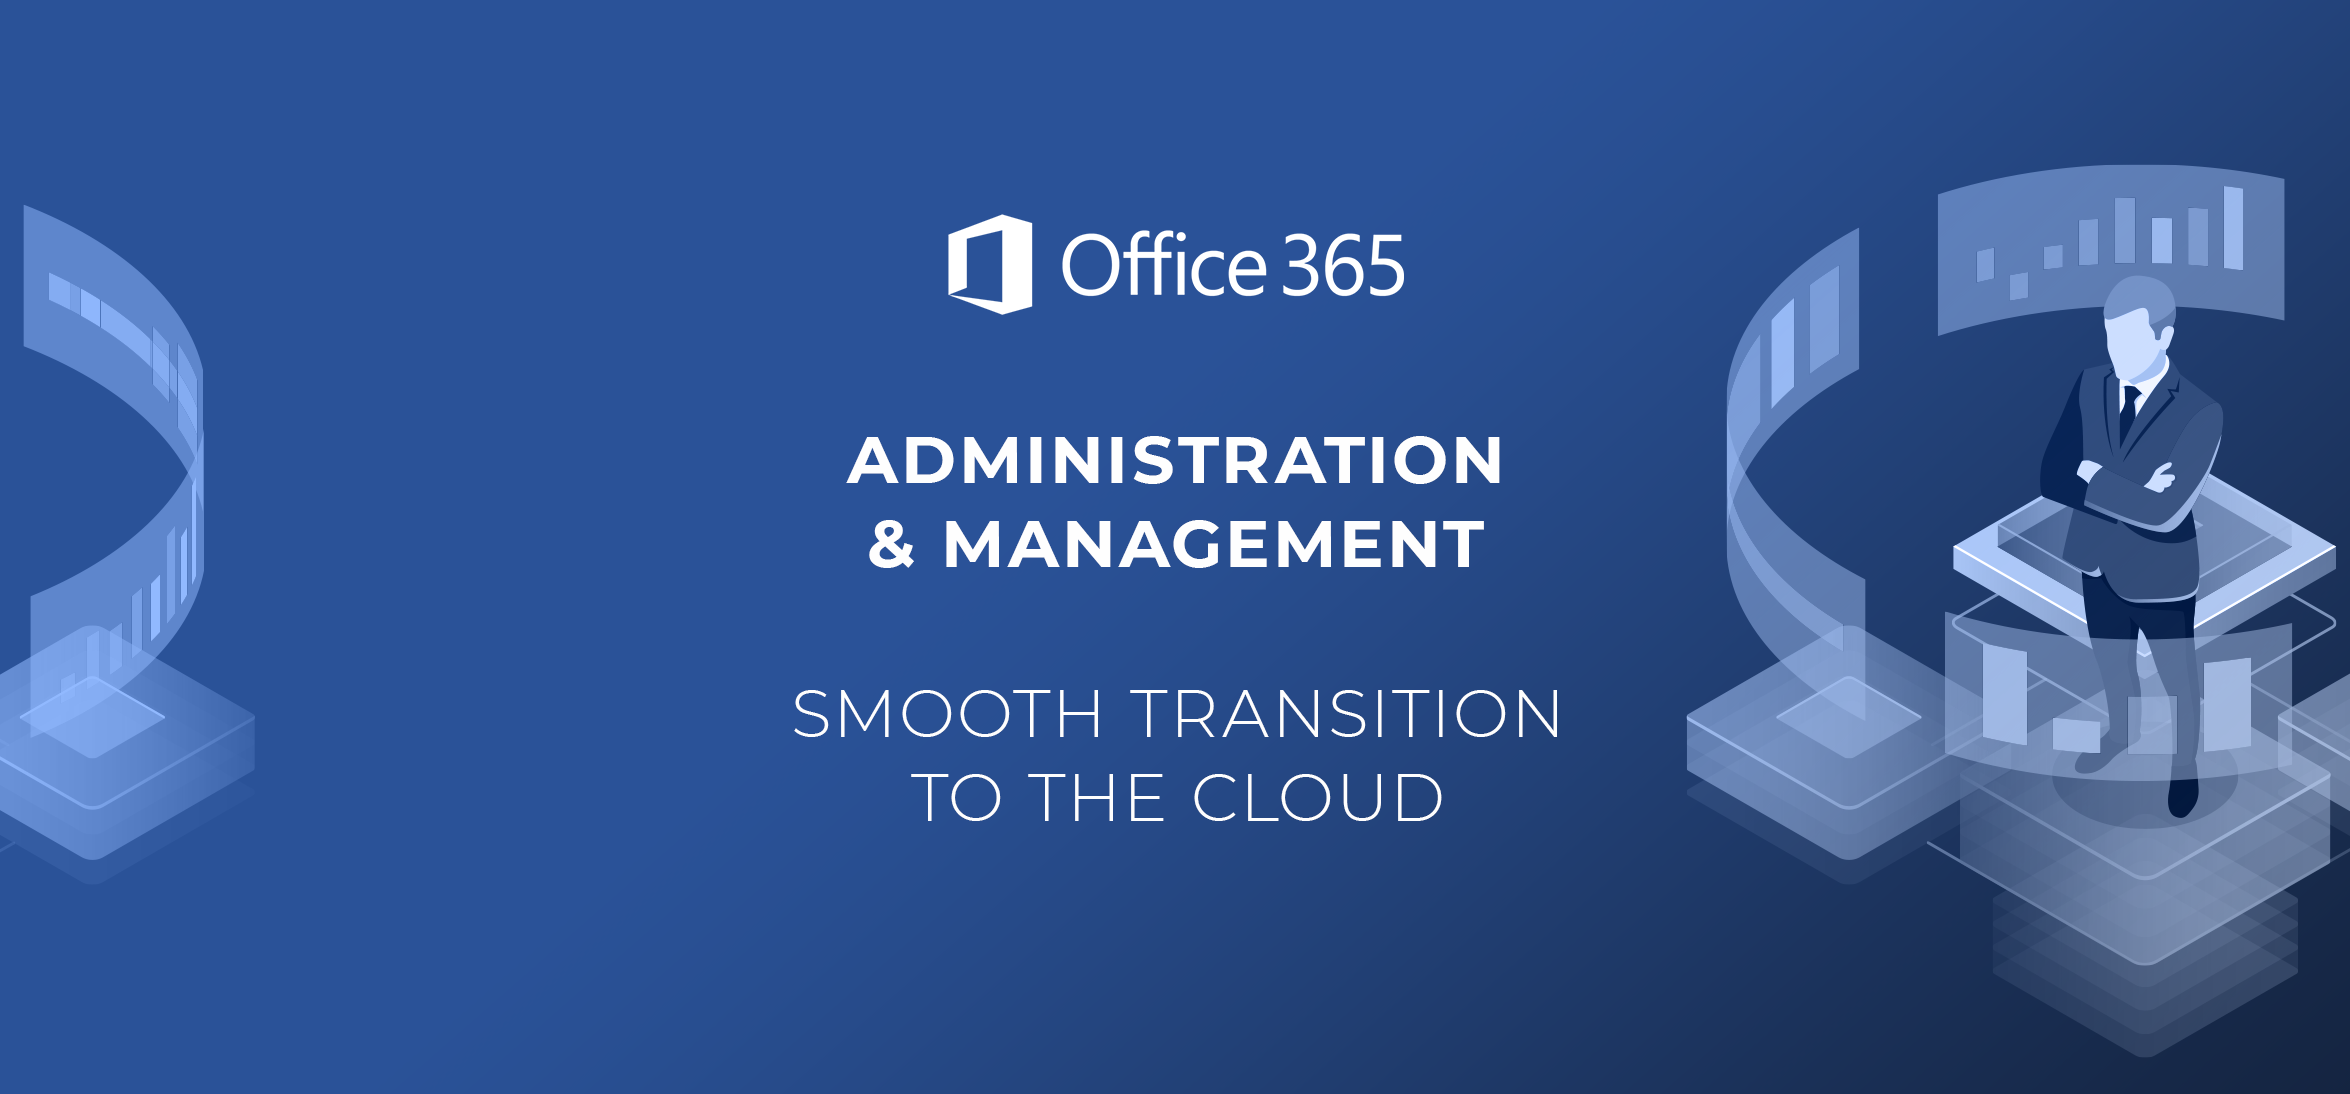 Microsoft Office 365 Administration Services in Lakeside CA, 92040